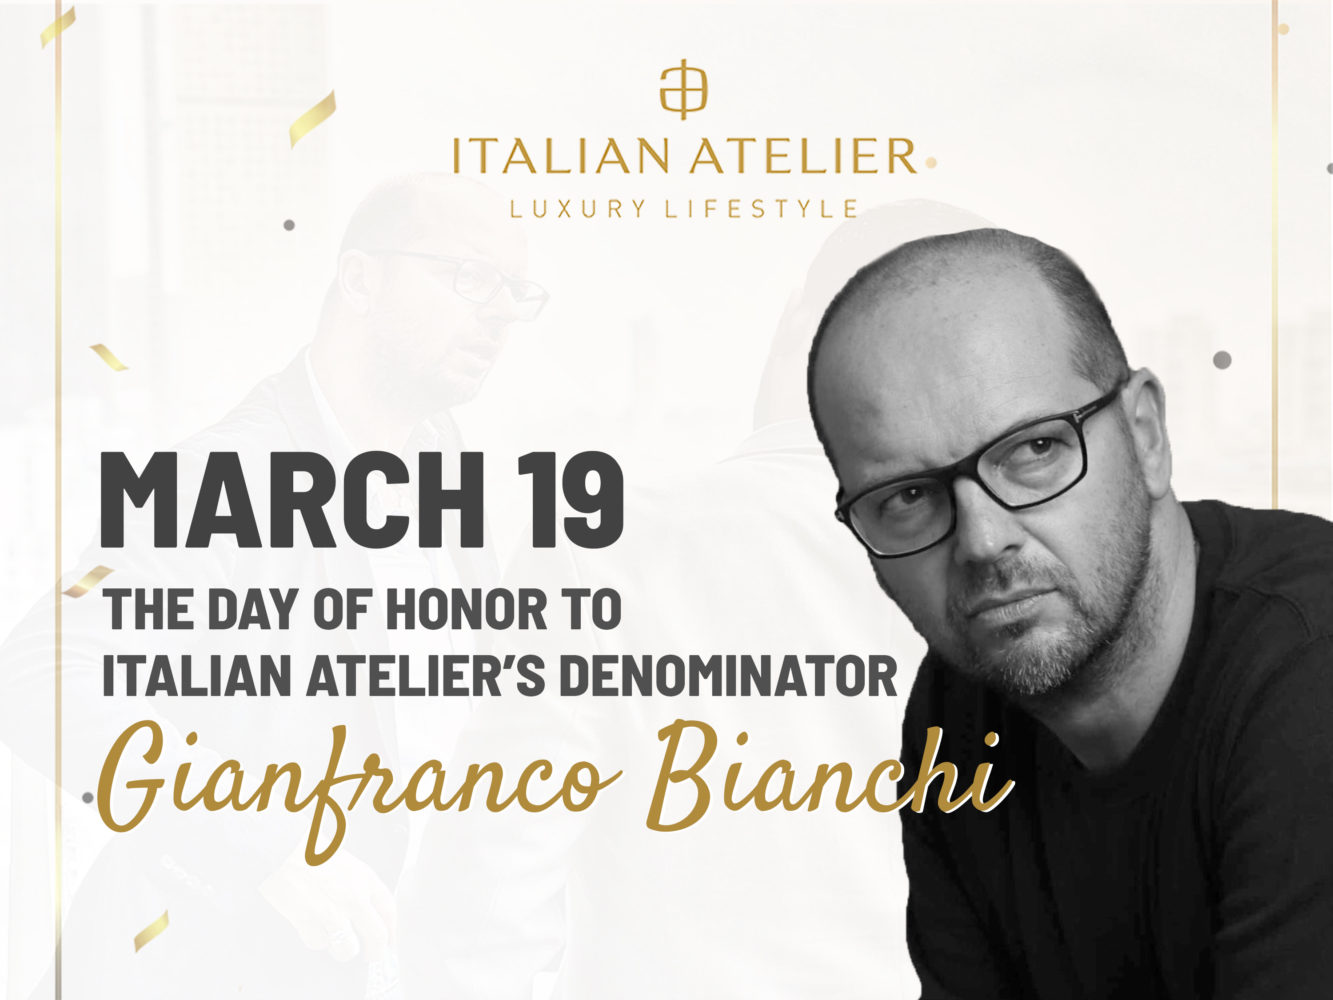 March 19 – The day of honor to Italian Atelier’s denominator